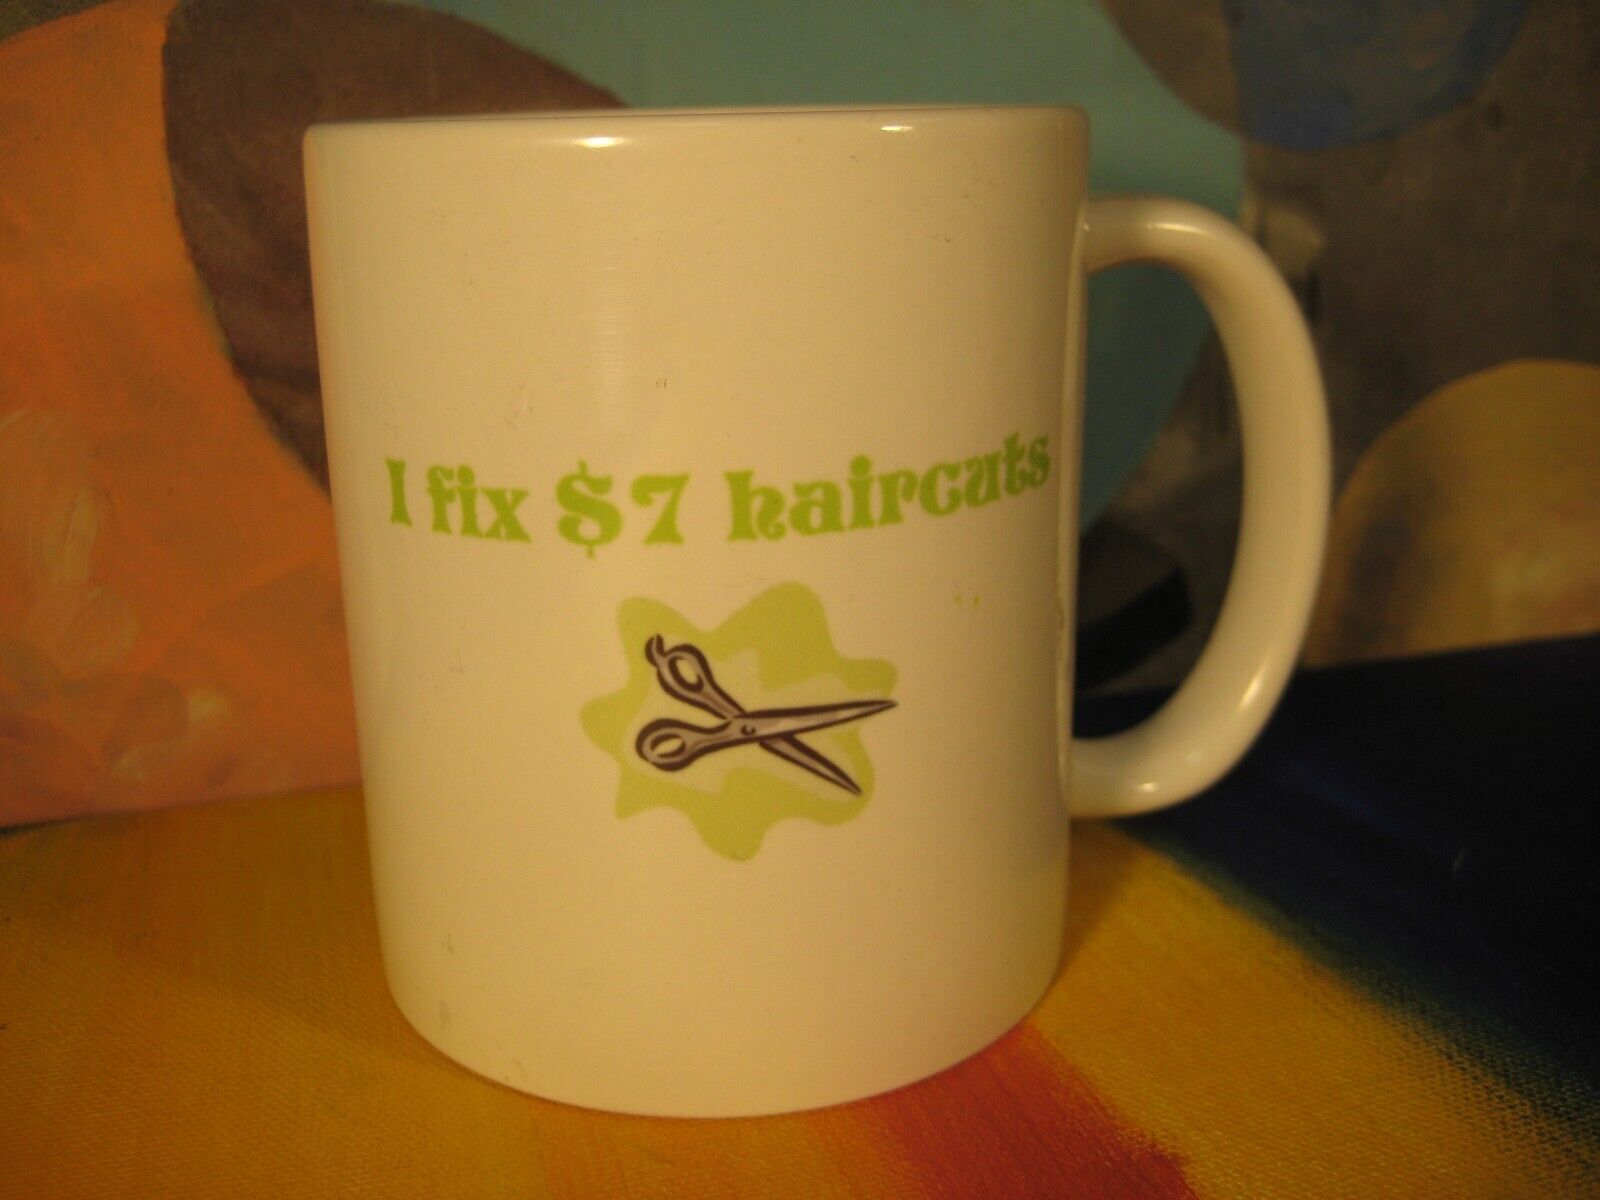 I Fix $7 Haircuts Barber Hairstylist Coffee Cup Mug by Perry's World Cafepress